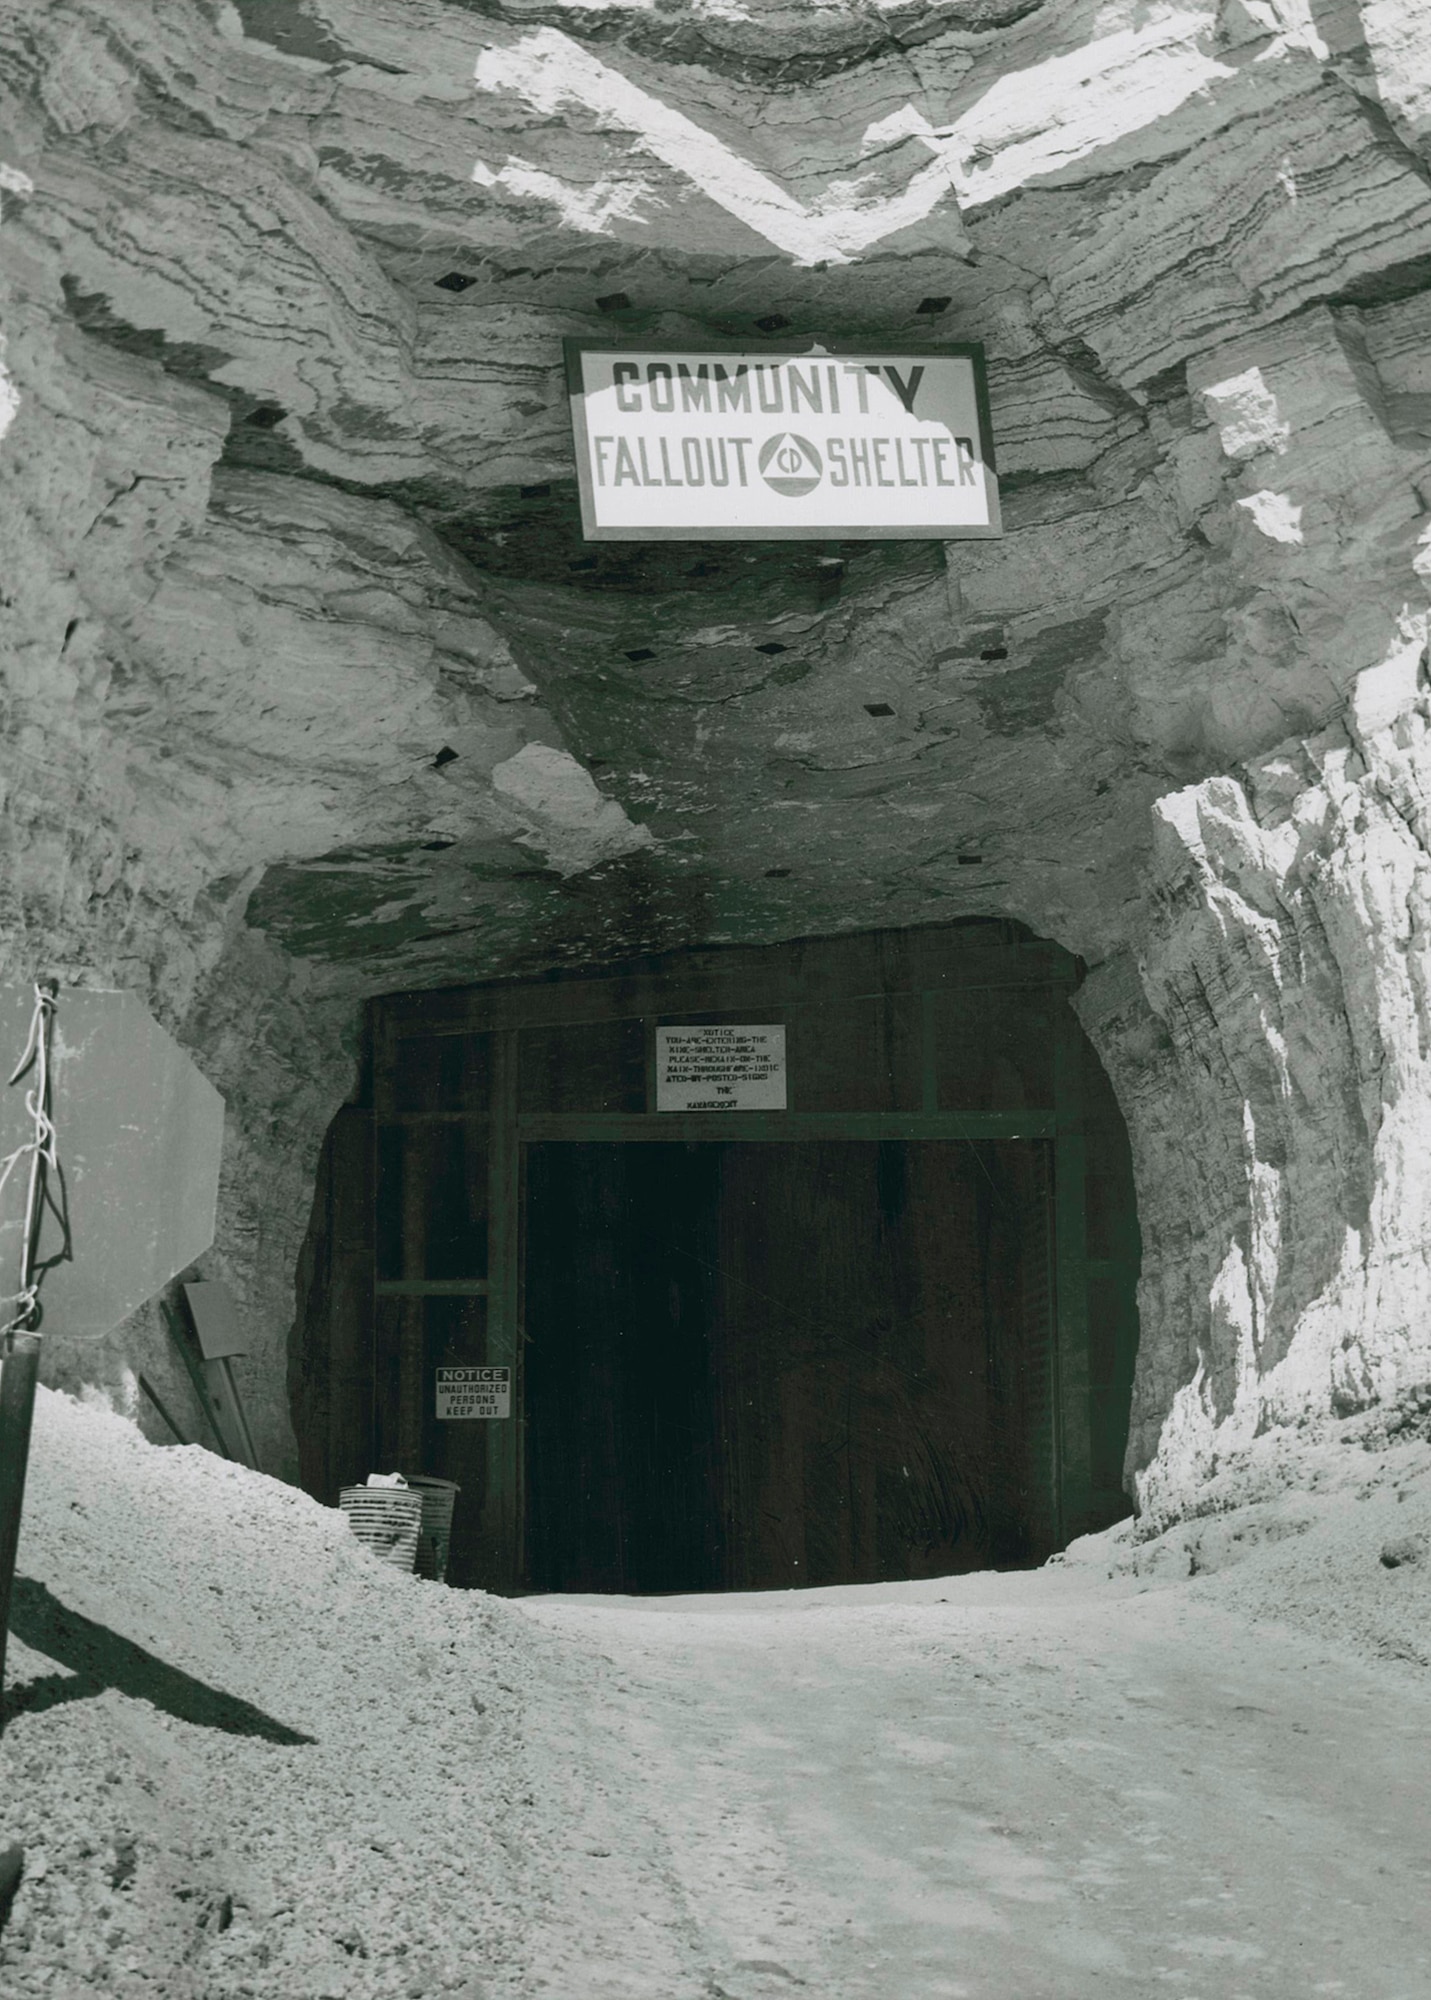 During the Cold War, approximately 100 volunteers readied a community fallout shelter, located in the Borax Mine, approximately 12 miles from Edwards and equipped it with enough water, food and medical services for 17,000 people. Also in the shelter was an emergency command post. (Courtesy Photo)